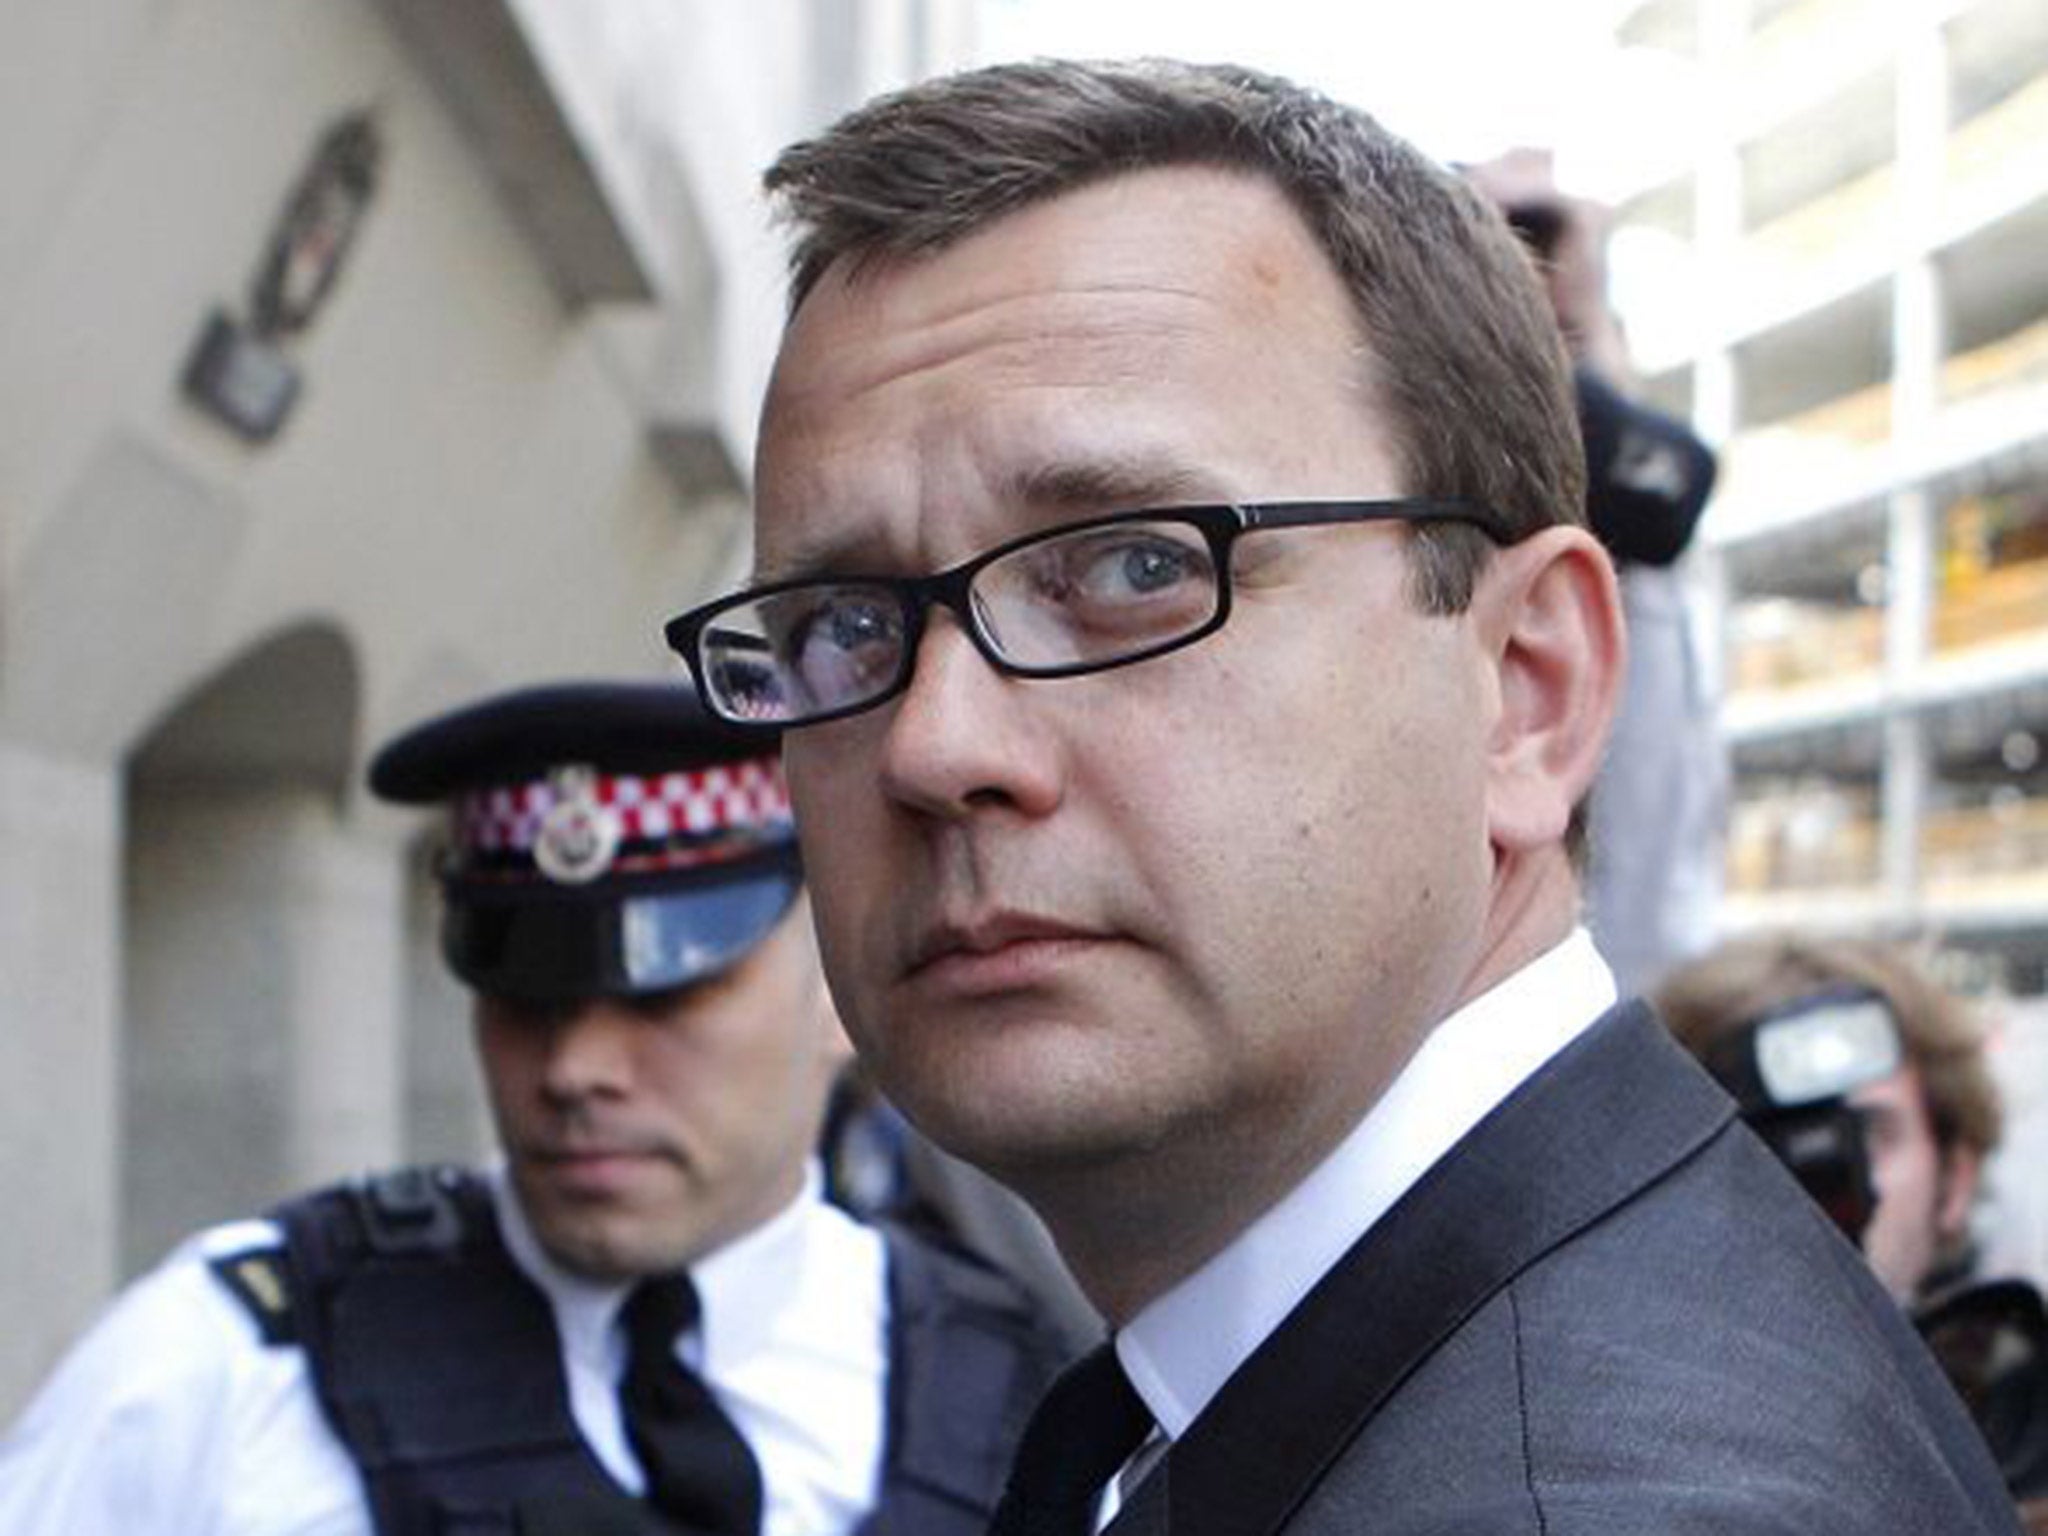 Andy Coulson arriving at the Old Bailey for sentencing after being convicted of phone hacking, earlier this year (Getty)